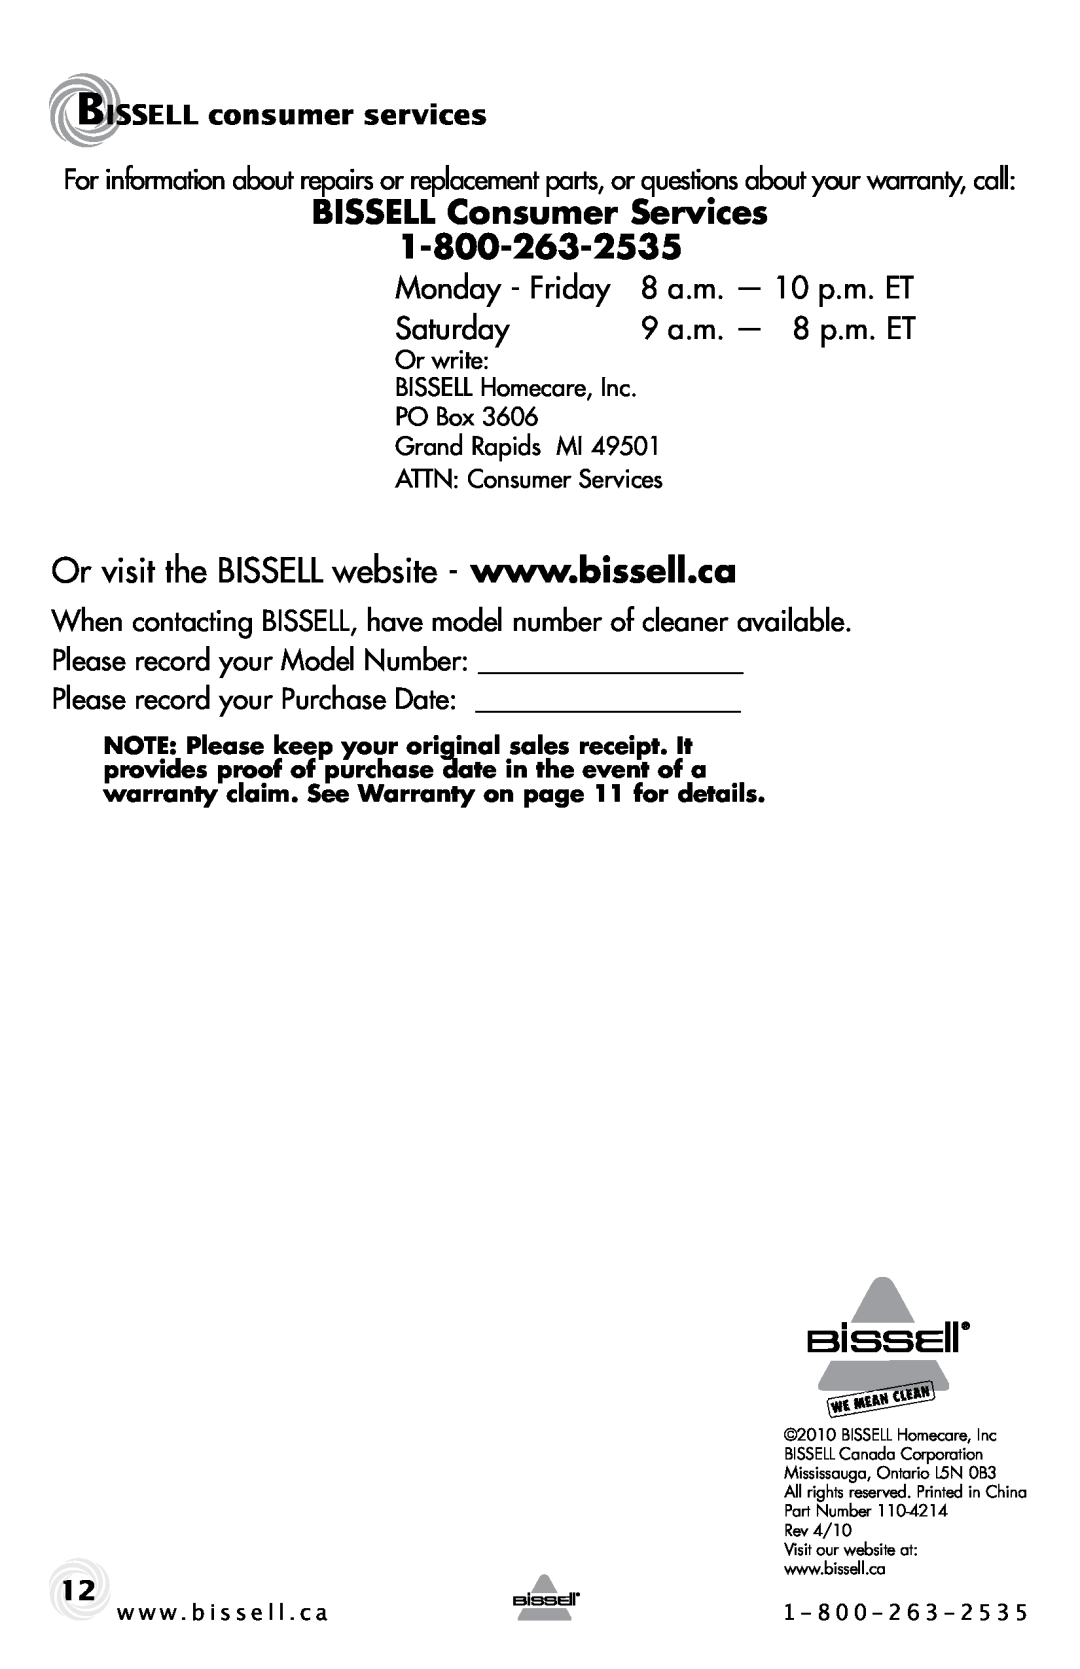 Bissell 22Q3 BISSELL Consumer Services, Monday - Friday, Saturday, 9 a.m. - 8 p.m. ET, 8 a.m. - 10 p.m. ET, Or write 